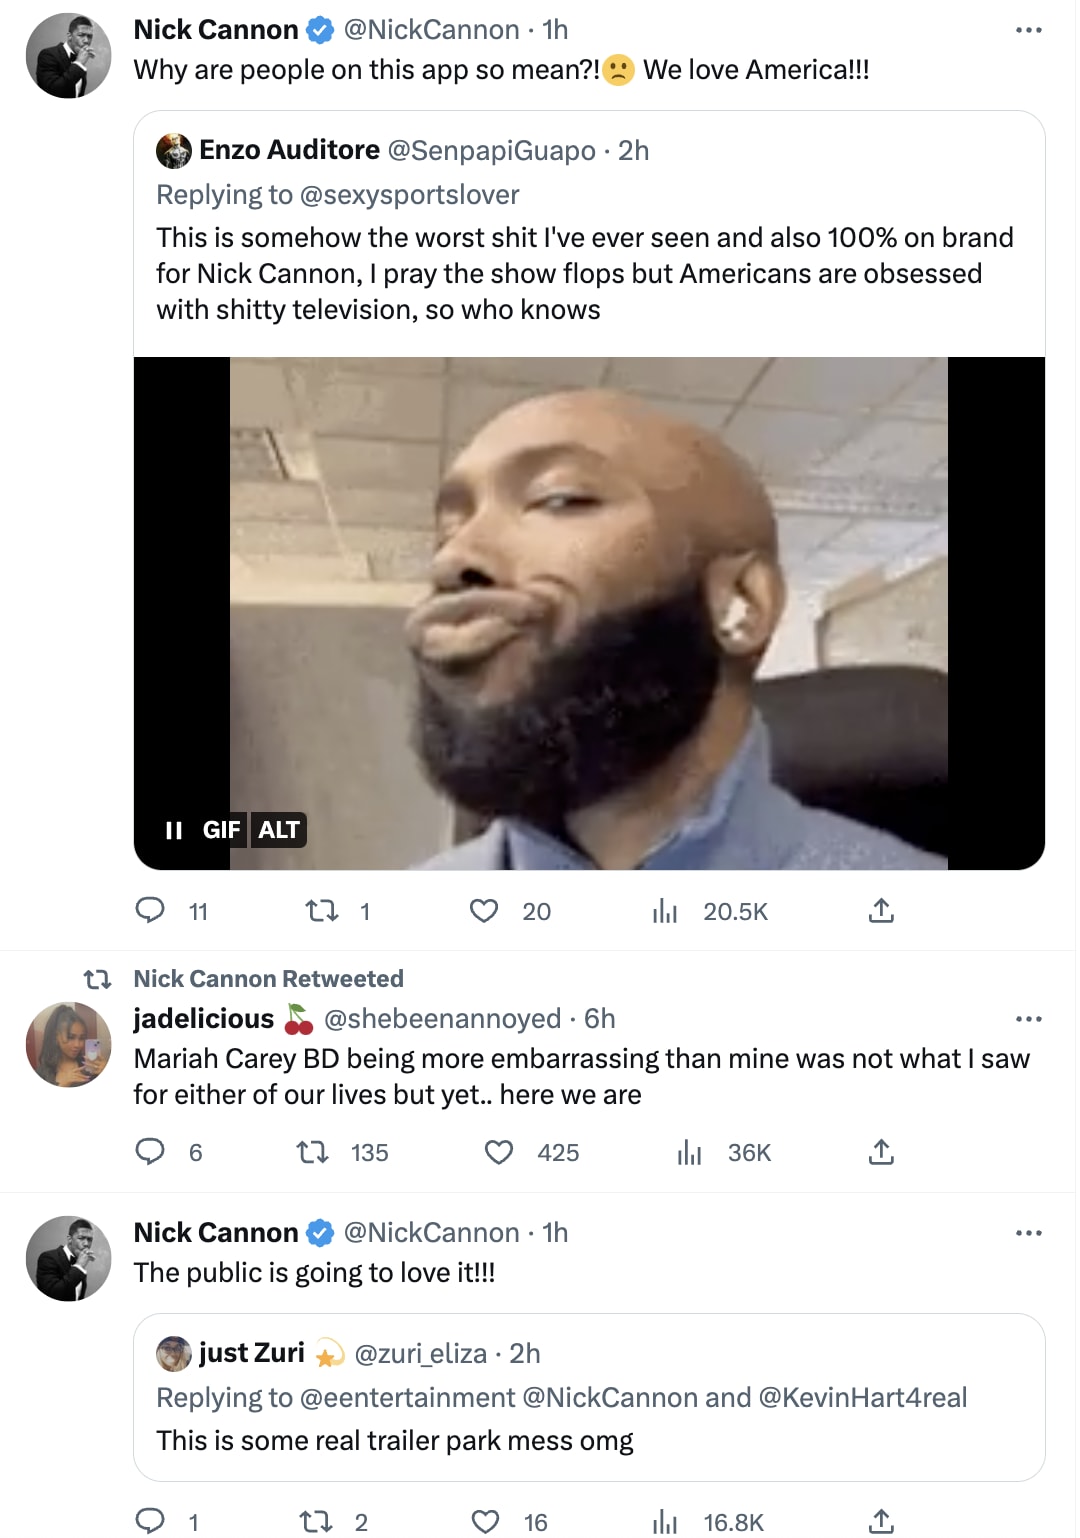 Nick Cannon&#x27;s screenshotted tweeted